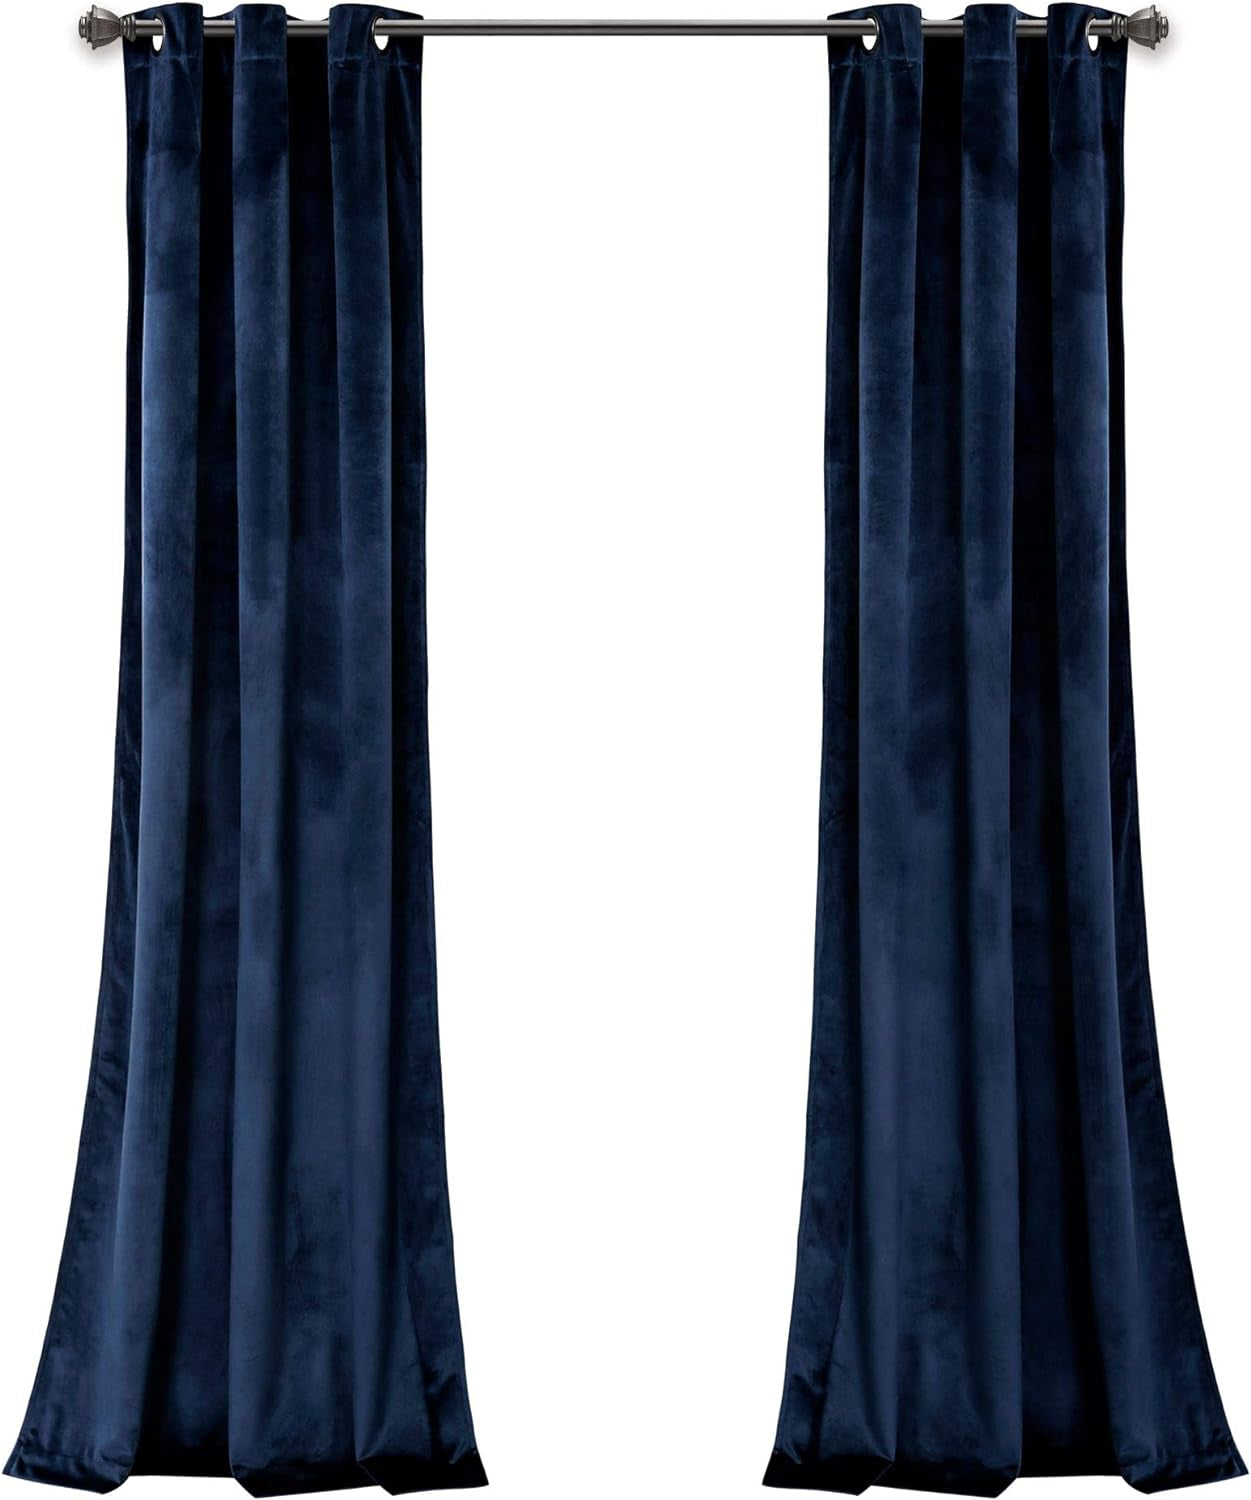 Lush Decor Prima Velvet Curtains Color Block Light Filtering Window Panel Set for Living, Dining, Bedroom (Pair), 38" W X 84" L, Navy  Triangle Home Fashions   